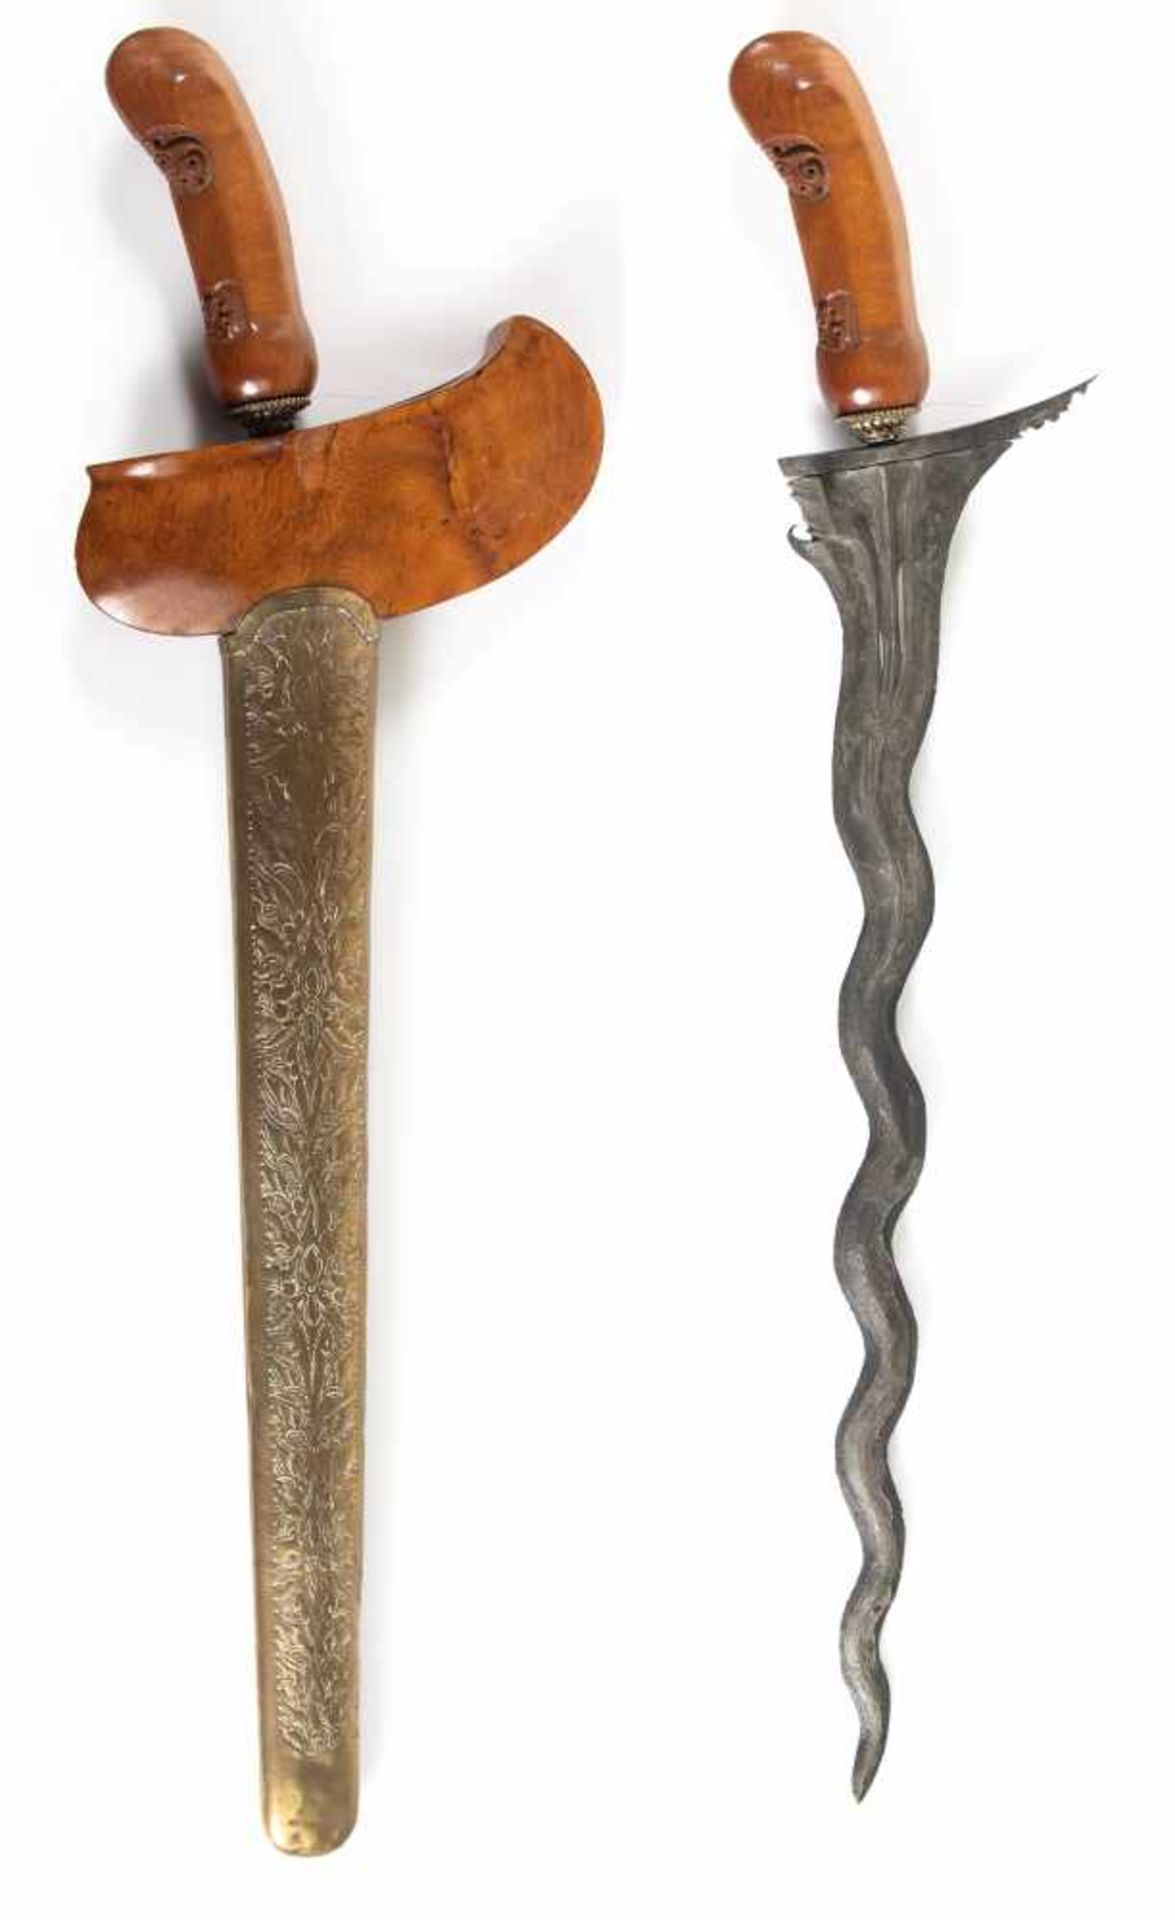 A Javanese Keris, with early 17th century blade.A Javanese Keris, with early 17th century blade.